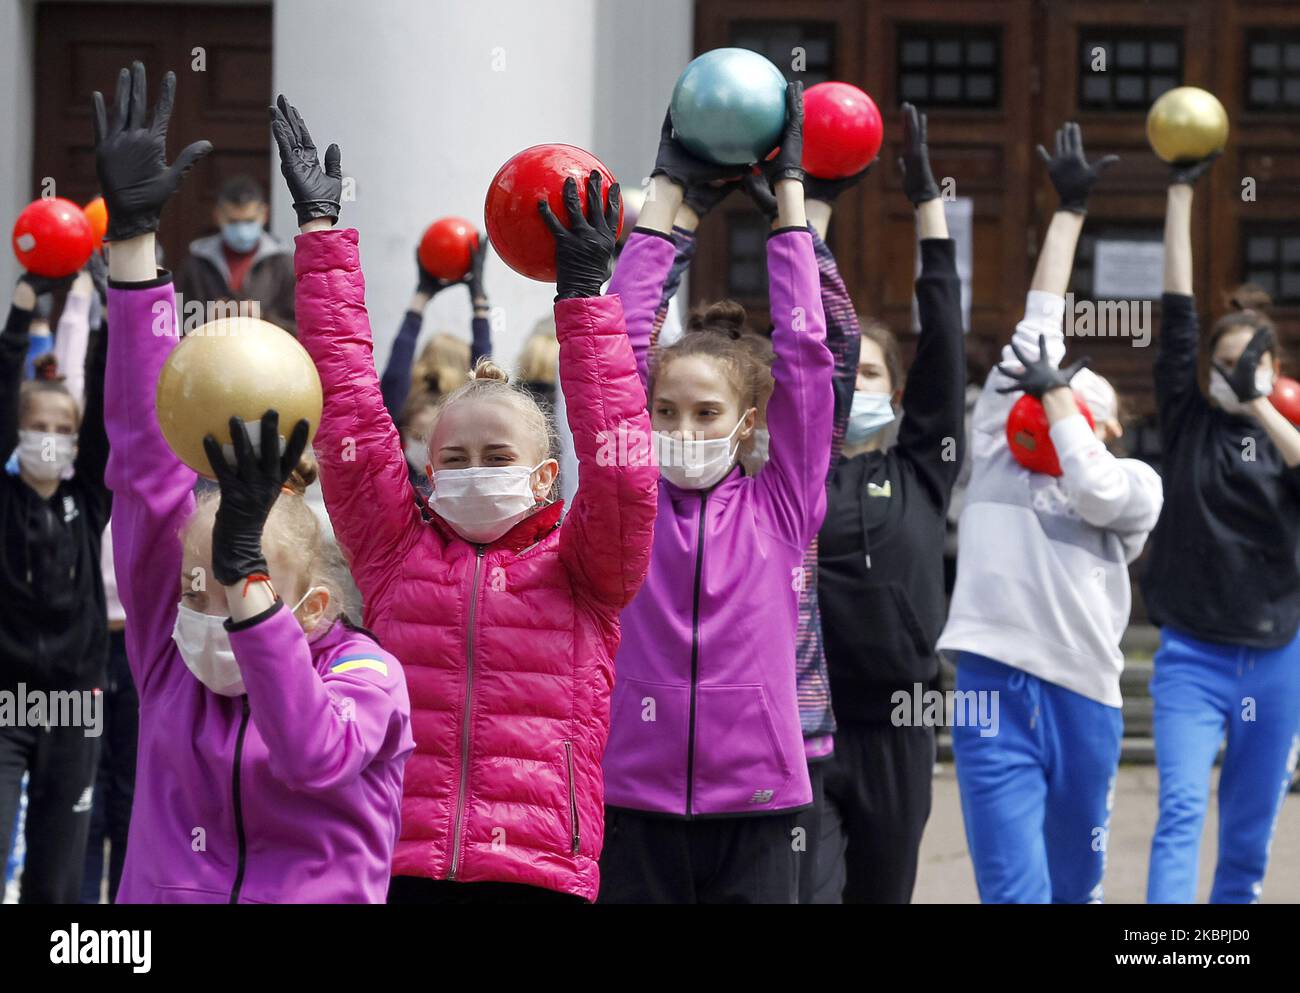 Gymnasts of the Deriugina School wearing protective masks amid the Covid-19 coronavirus epidemic take part at a trainning session in central Kyiv, Ukraine, on 01 June, 2020. Young gymnasts had a training on a street to support the 'Save Deriugina School' action, which was organized in support of Irina Deryugina children's and youth sports school of gymnastics. (Photo by STR/NurPhoto) Stock Photo